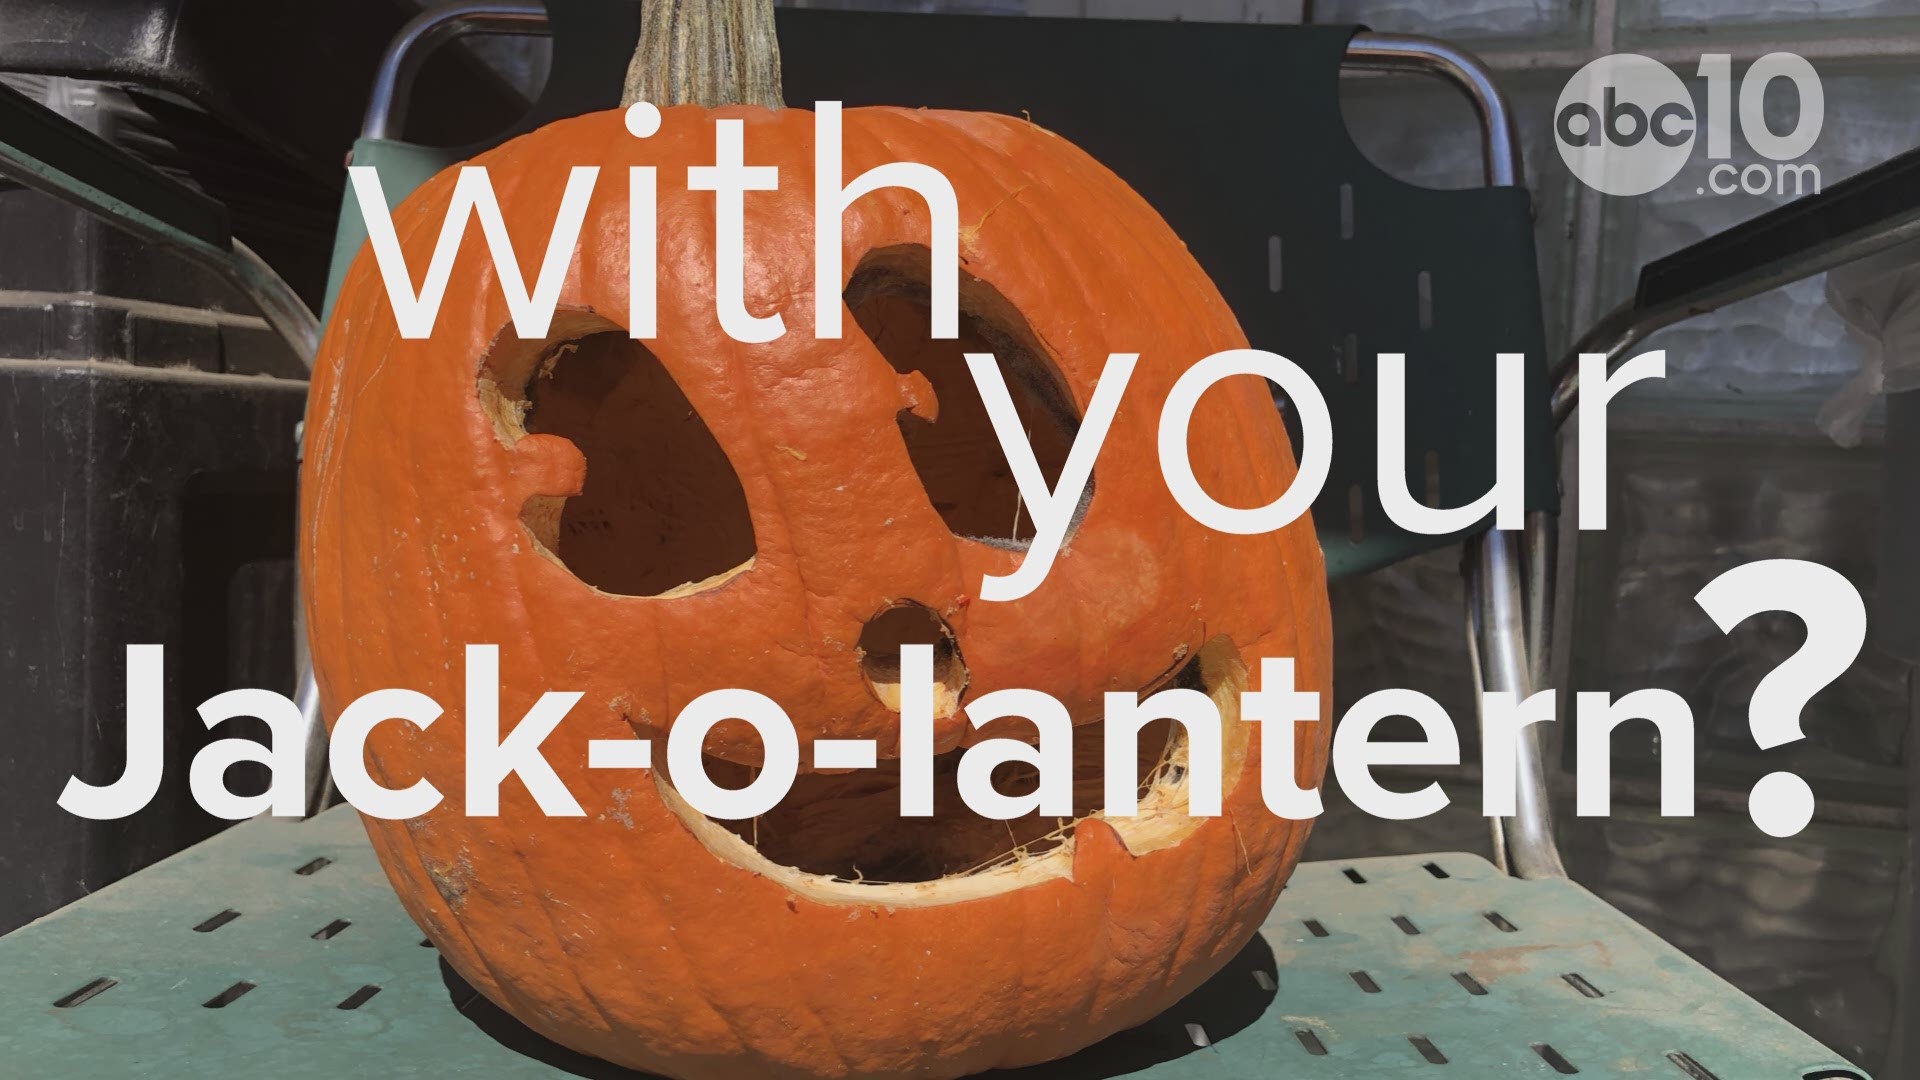 Throwing away your jack-o-lantern is easy, but there are some other things you can do with your leftover pumpkins. We have some tips on what else you can do with them.